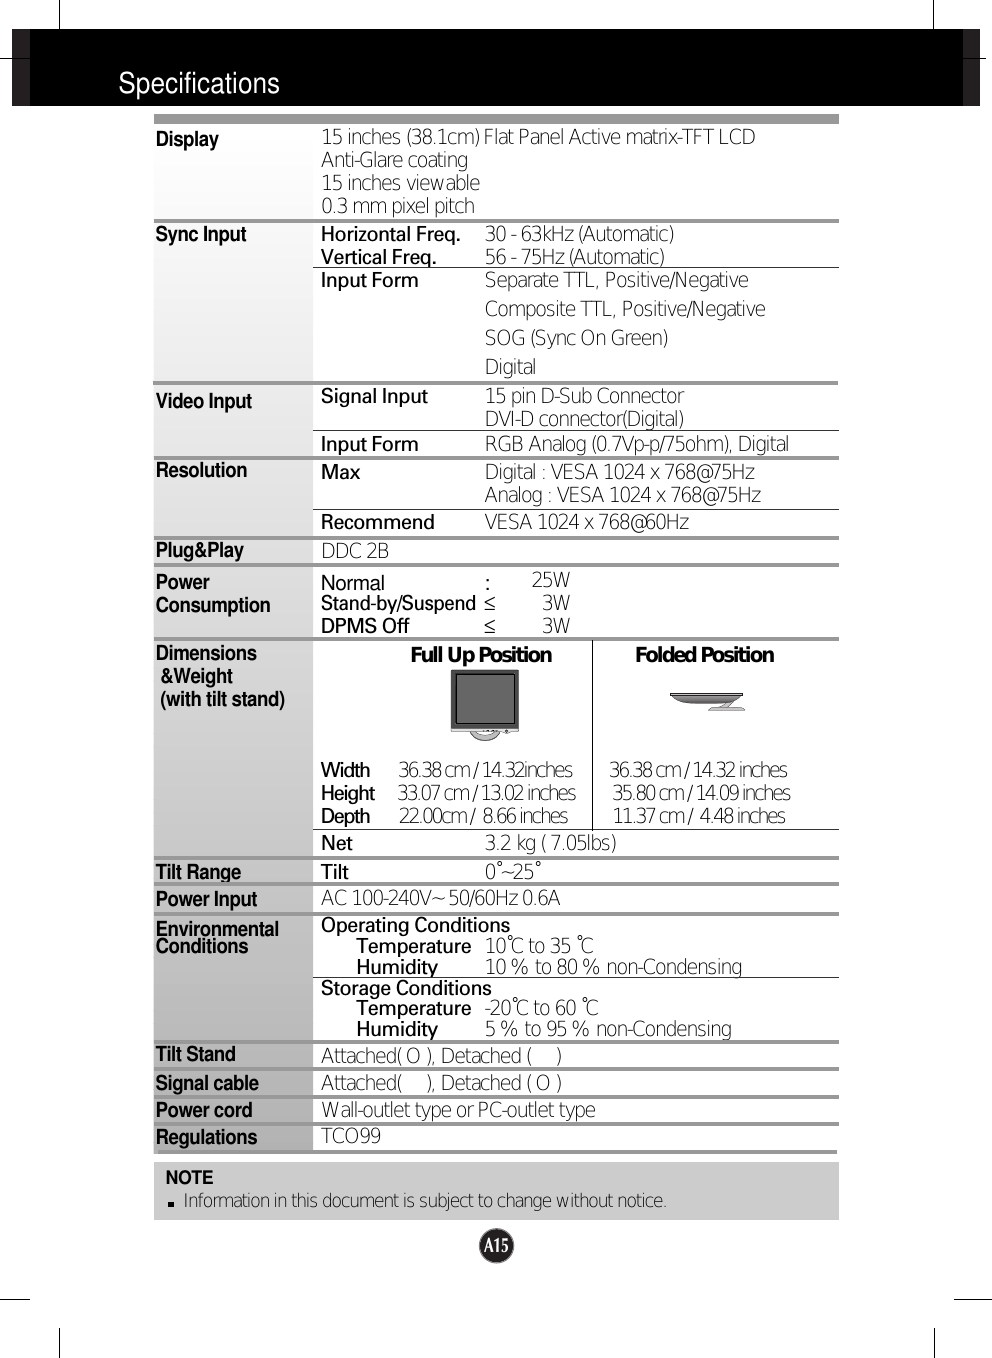 A15SpecificationsNOTEInformation in this document is subject to change without notice.15 inches (38.1cm) Flat Panel Active matrix-TFT LCD Anti-Glare coating15 inches viewable0.3 mm pixel pitchHorizontal Freq. 30 - 63kHz (Automatic)Vertical Freq. 56 - 75Hz (Automatic)Input Form Separate TTL, Positive/NegativeComposite TTL, Positive/NegativeSOG (Sync On Green)DigitalSignal Input 15 pin D-Sub ConnectorDVI-D connector(Digital)Input Form RGB Analog (0.7Vp-p/75ohm), DigitalMax Digital : VESA 1024 x 768@75Hz Analog : VESA 1024 x 768@75Hz Recommend VESA 1024 x 768@60HzDDC 2BNormal :25WStand-by/Suspend≤3WDPMS Off ≤3WFull Up Position                 Folded PositionWidth   36.38 cm / 14.32inches         36.38 cm / 14.32 inchesHeight   33.07 cm / 13.02 inches         35.80 cm / 14.09 inchesDepth  22.00cm /  8.66 inches           11.37 cm /  4.48 inchesNet 3.2 kg ( 7.05lbs)Tilt 0˚~25˚AC 100-240V~ 50/60Hz 0.6AOperating ConditionsTemperature 10˚C to 35 ˚CHumidity 10 % to 80 % non-CondensingStorage ConditionsTemperature -20˚C to 60 ˚CHumidity 5 % to 95 % non-CondensingAttached( O ), Detached (     )Attached(     ), Detached ( O )Wall-outlet type or PC-outlet typeTCO99DisplaySync InputVideo InputResolutionPlug&amp;PlayPowerConsumptionDimensions&amp;Weight(with tilt stand)Tilt RangePower InputEnvironmentalConditionsTilt StandSignal cablePower cord Regulations